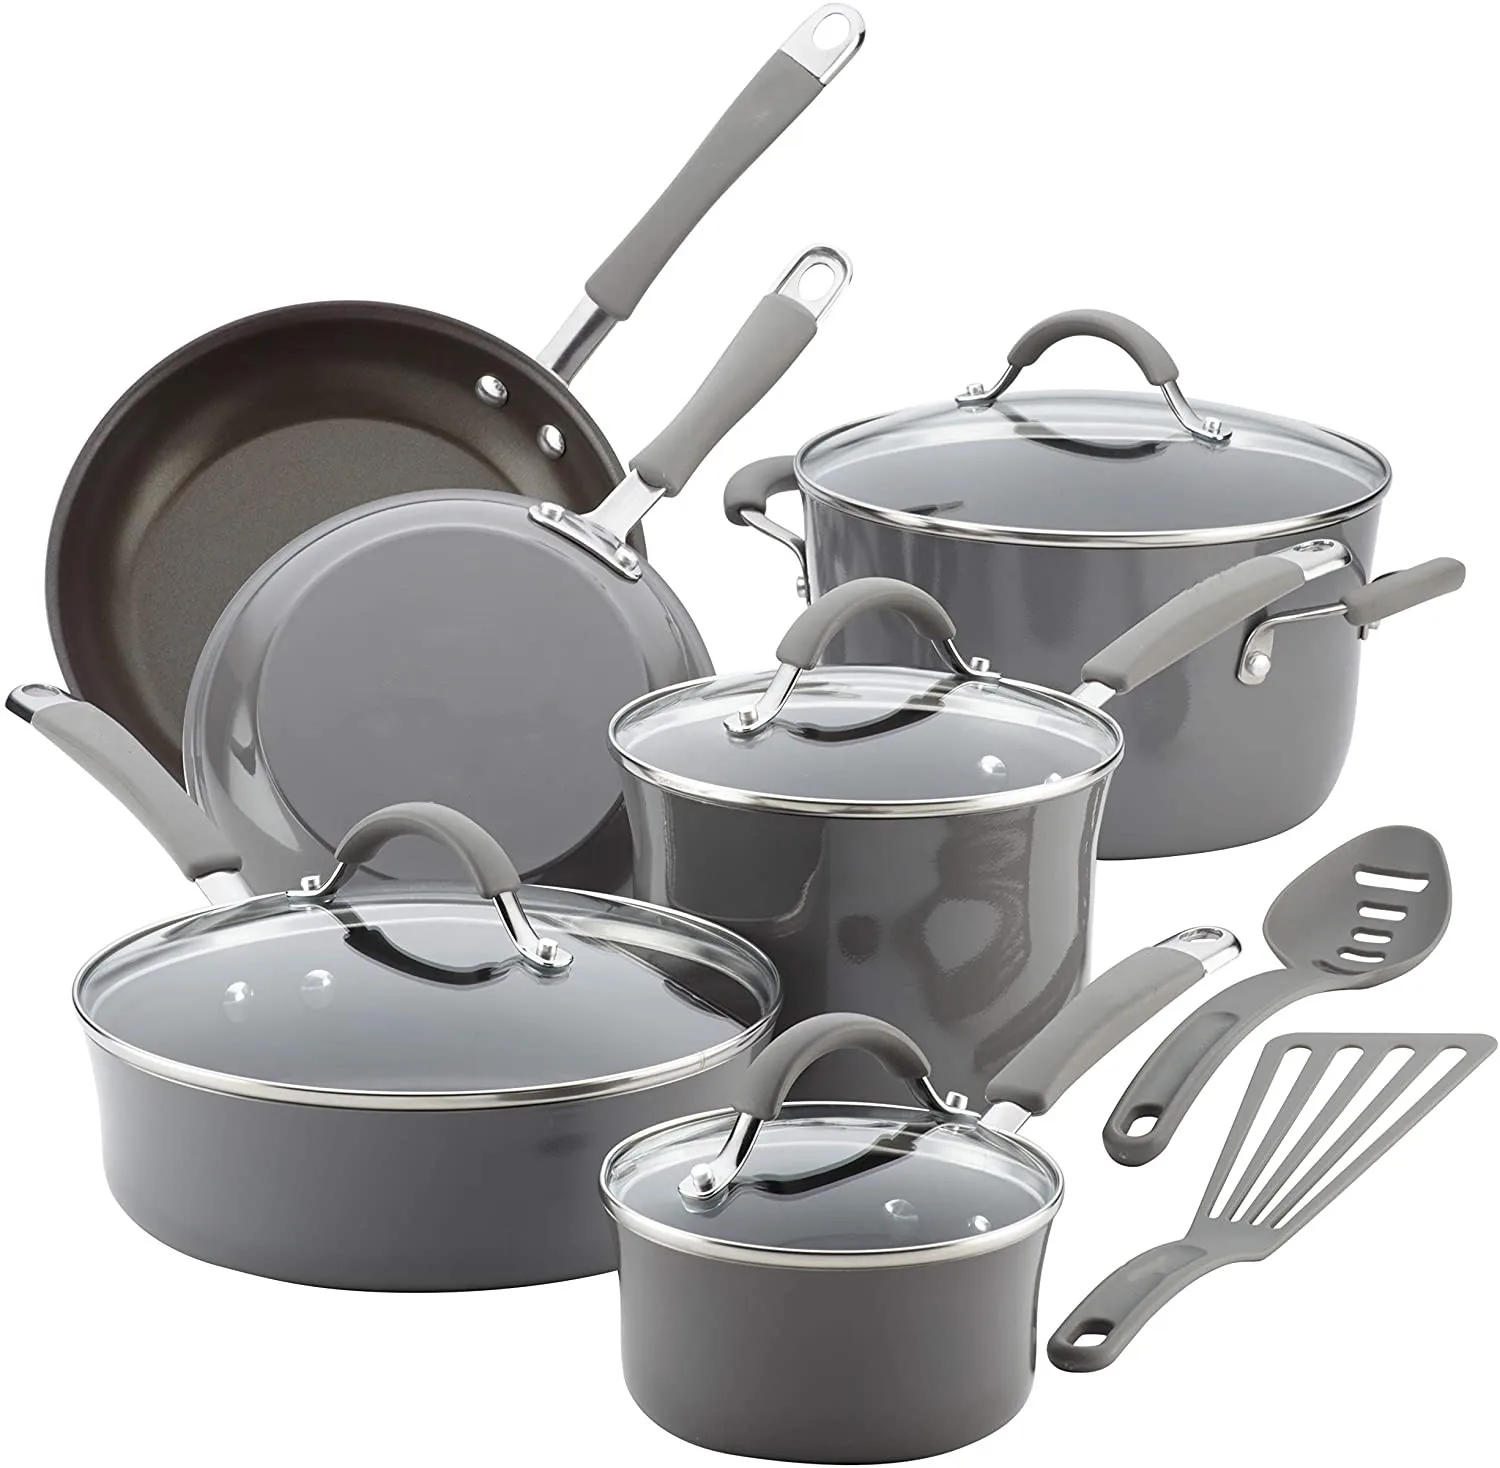 

12 Pcs Top Quality Cooking Pots And Pans Cookware Casserole Set Stainless Steel with Glass Metal Pan Handles